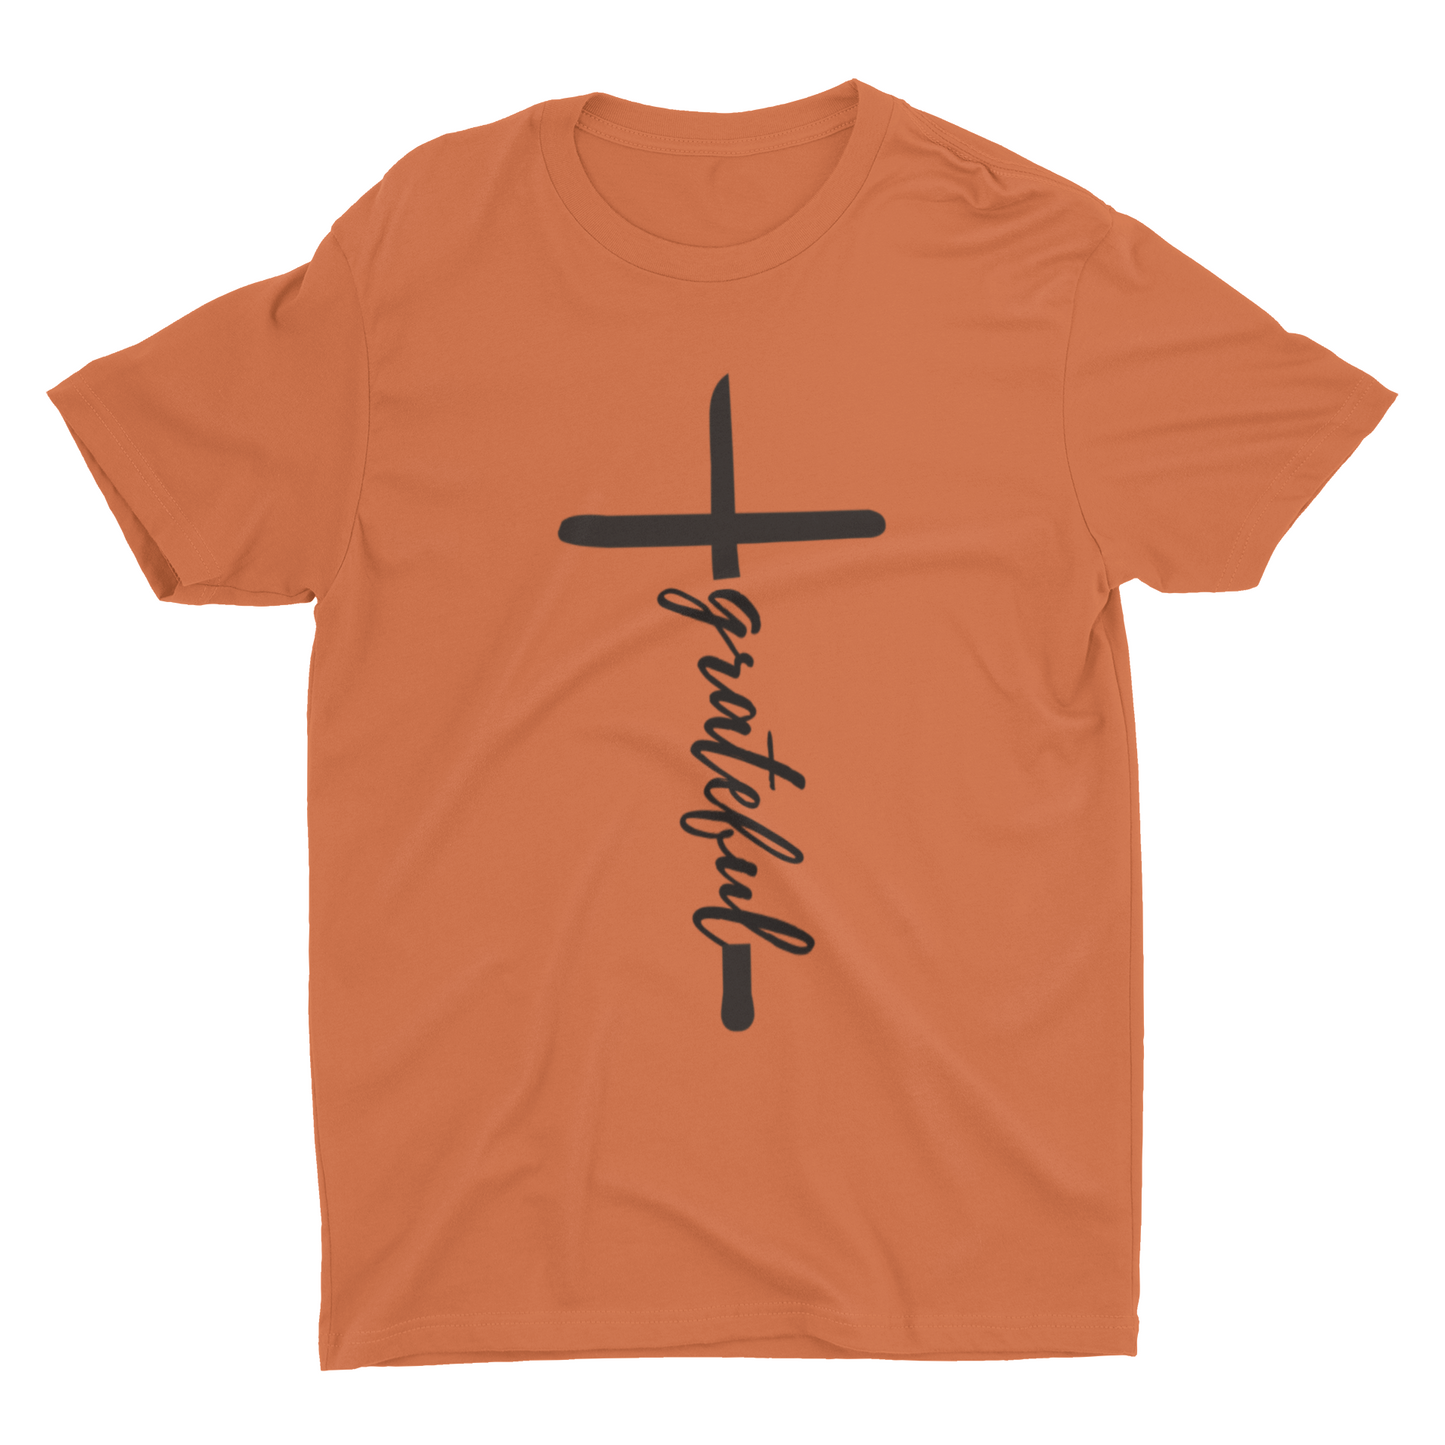 Grateful cross graphic t-shirt for fall